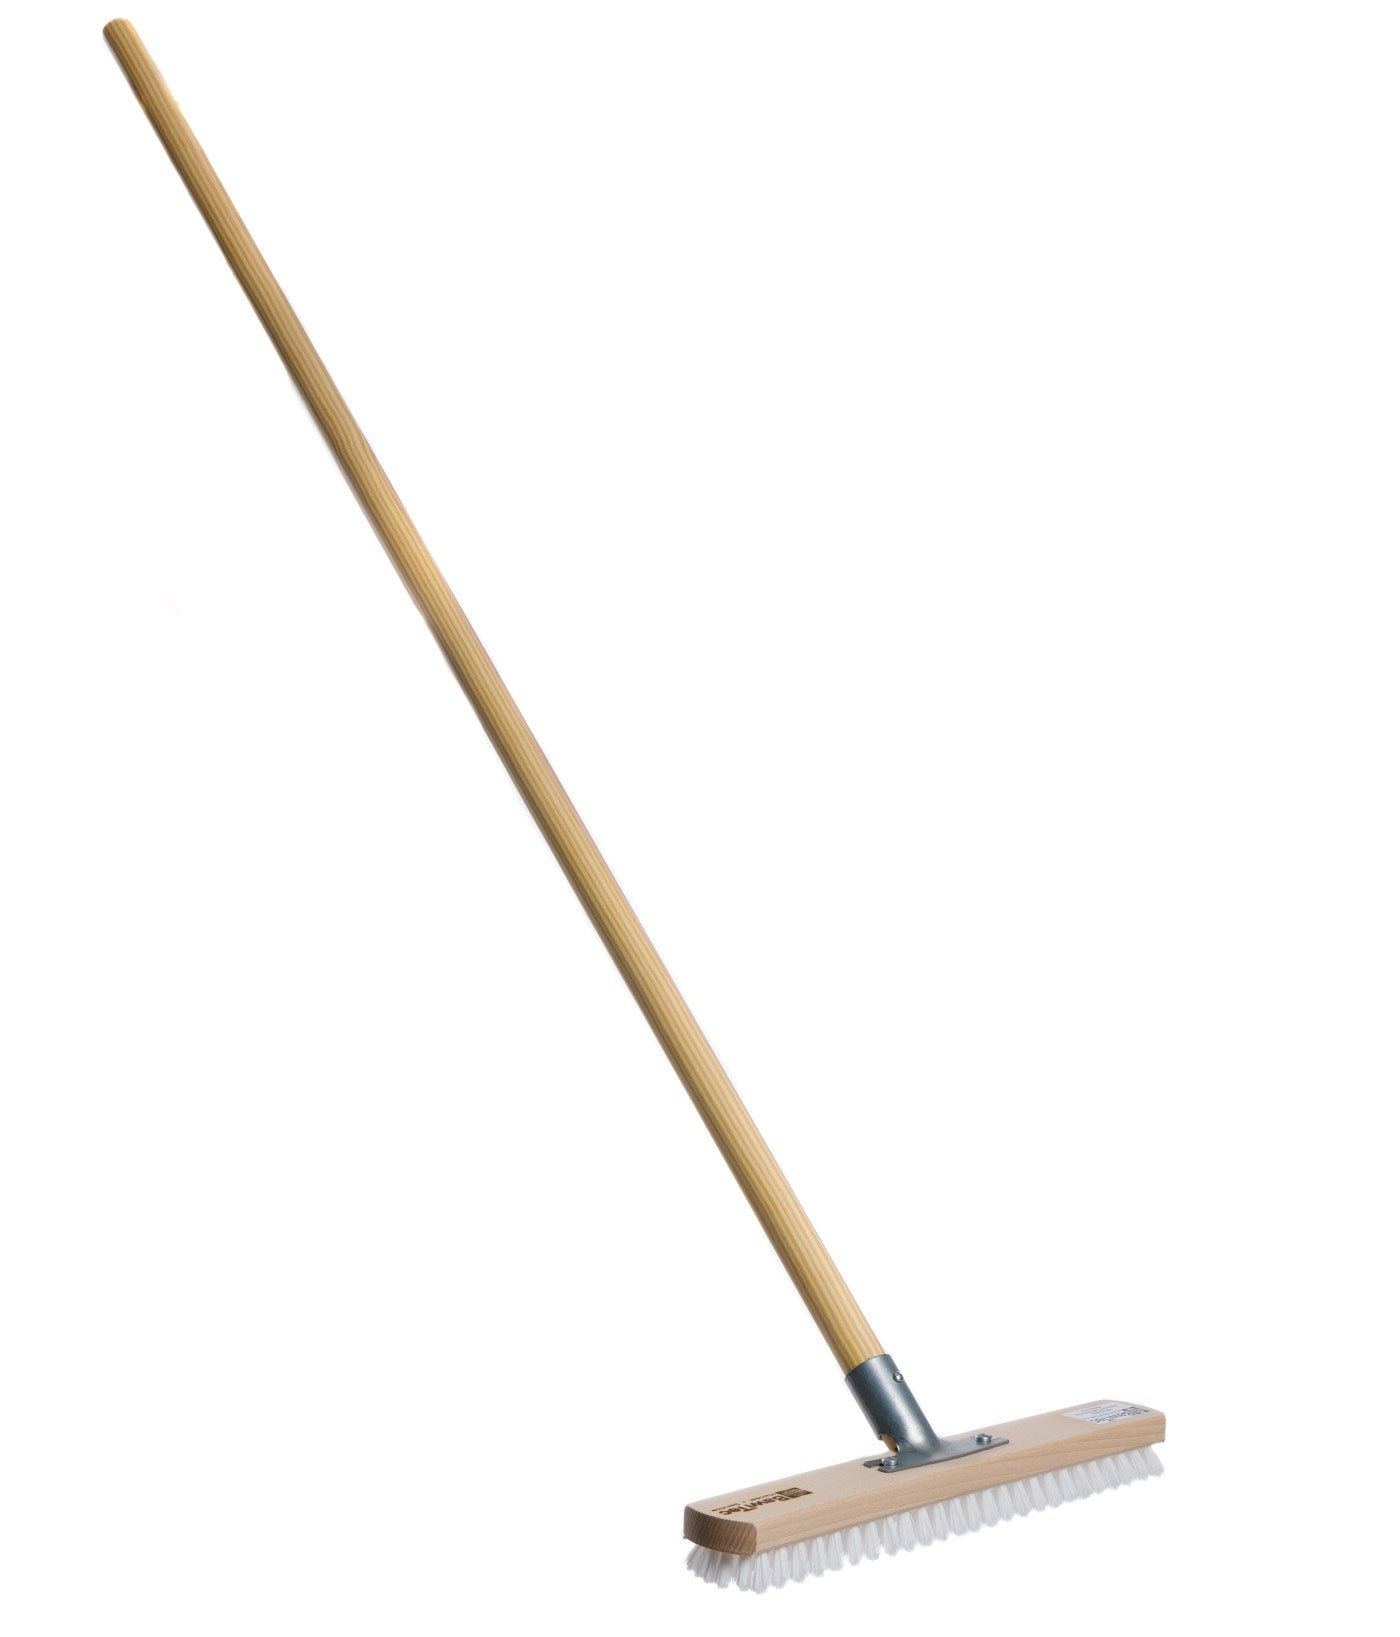 Professional large area scrubber 40cm wide with metal holder and wooden handle 140cm long 